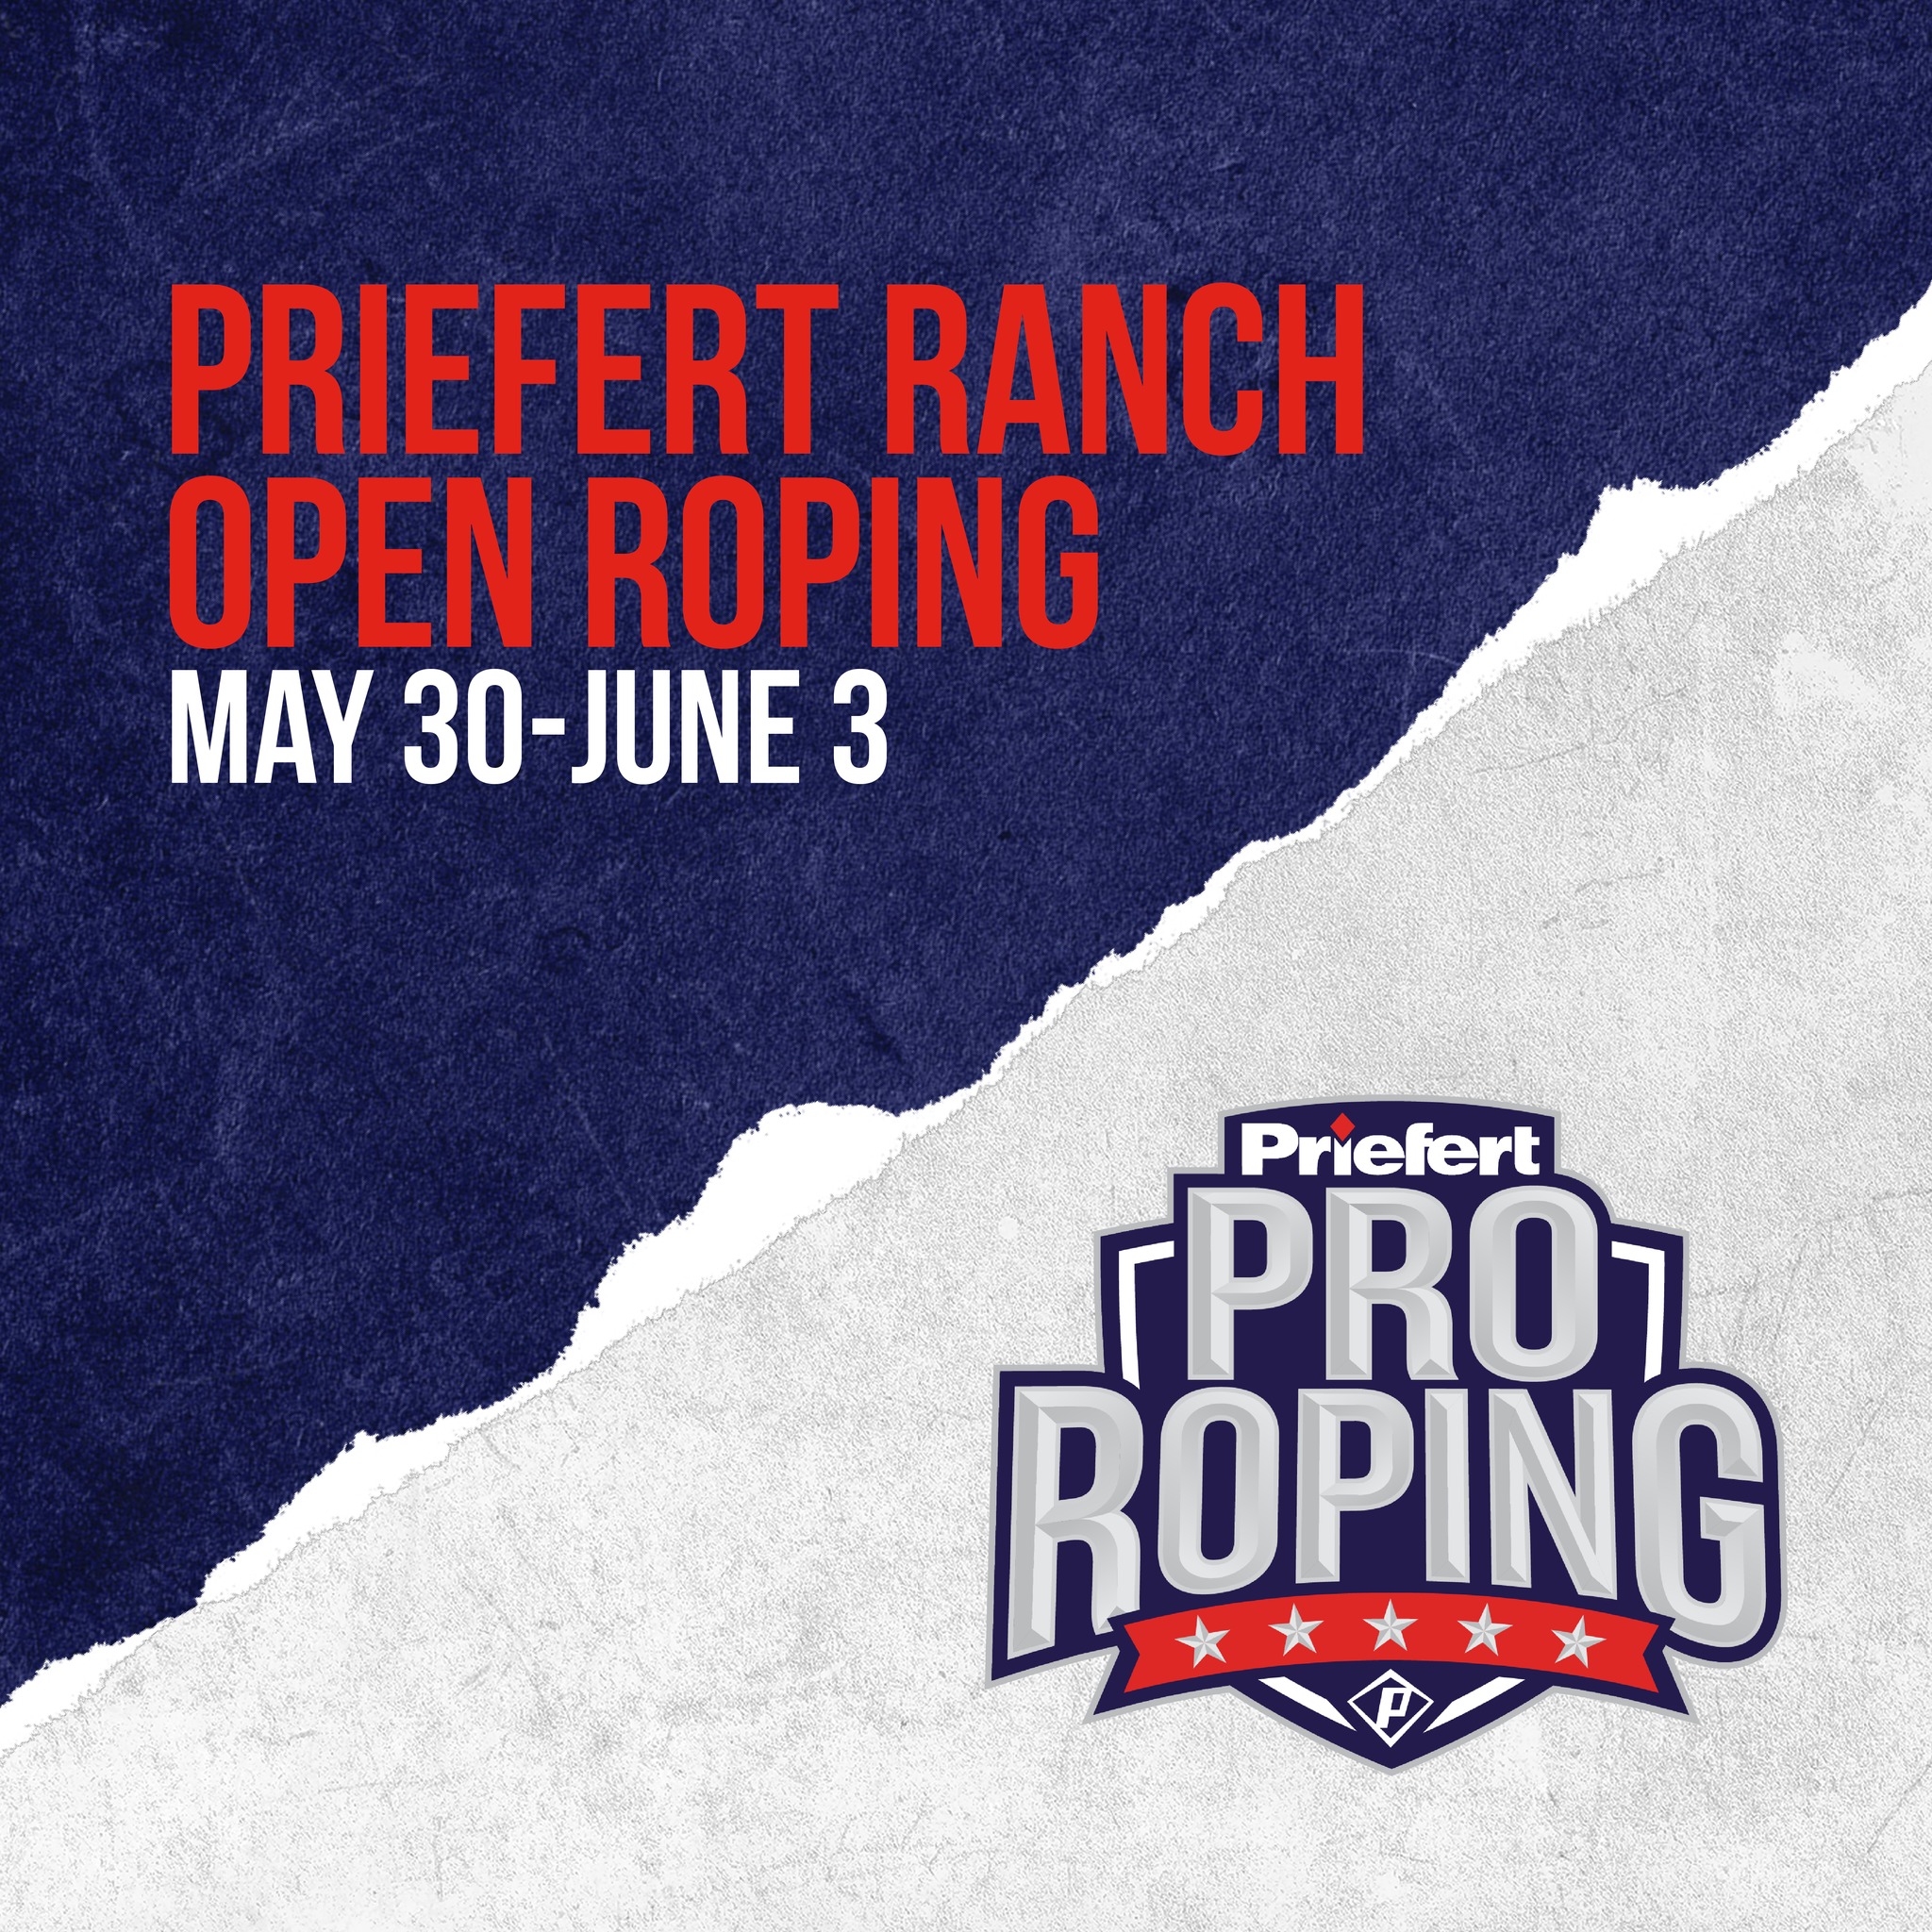 The priefert Ranch Open graphic